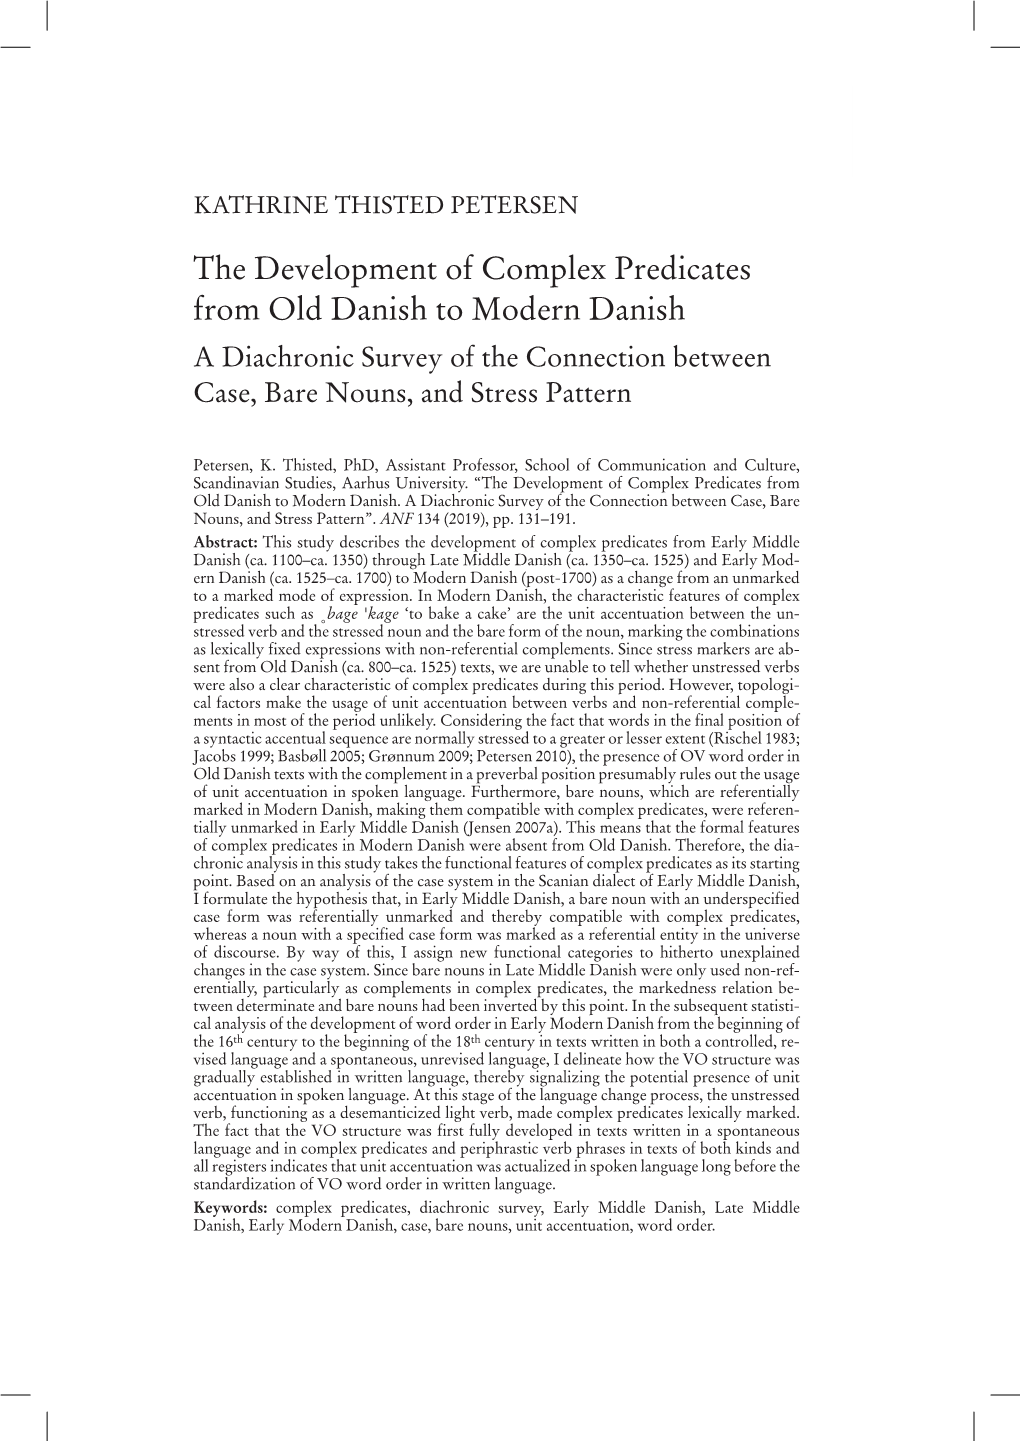 Petersen 2019. the Development of Complex Predicates from Old